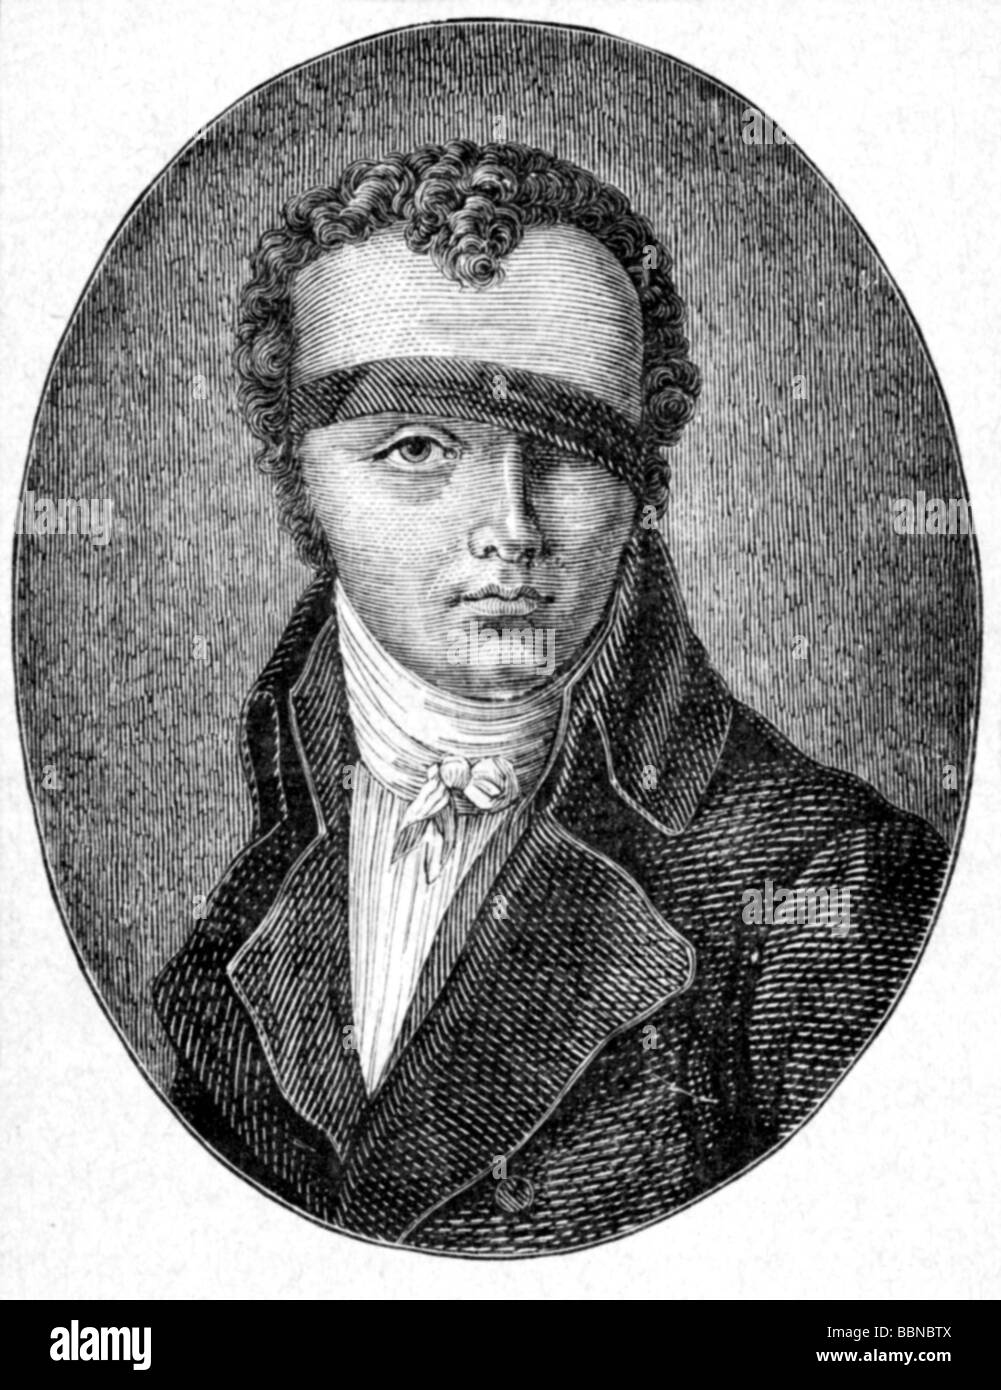 Conte, Nicolas-Jacques, 1755 - 1805, French chemist, medic and painter, portrait, wood engraving, Stock Photo